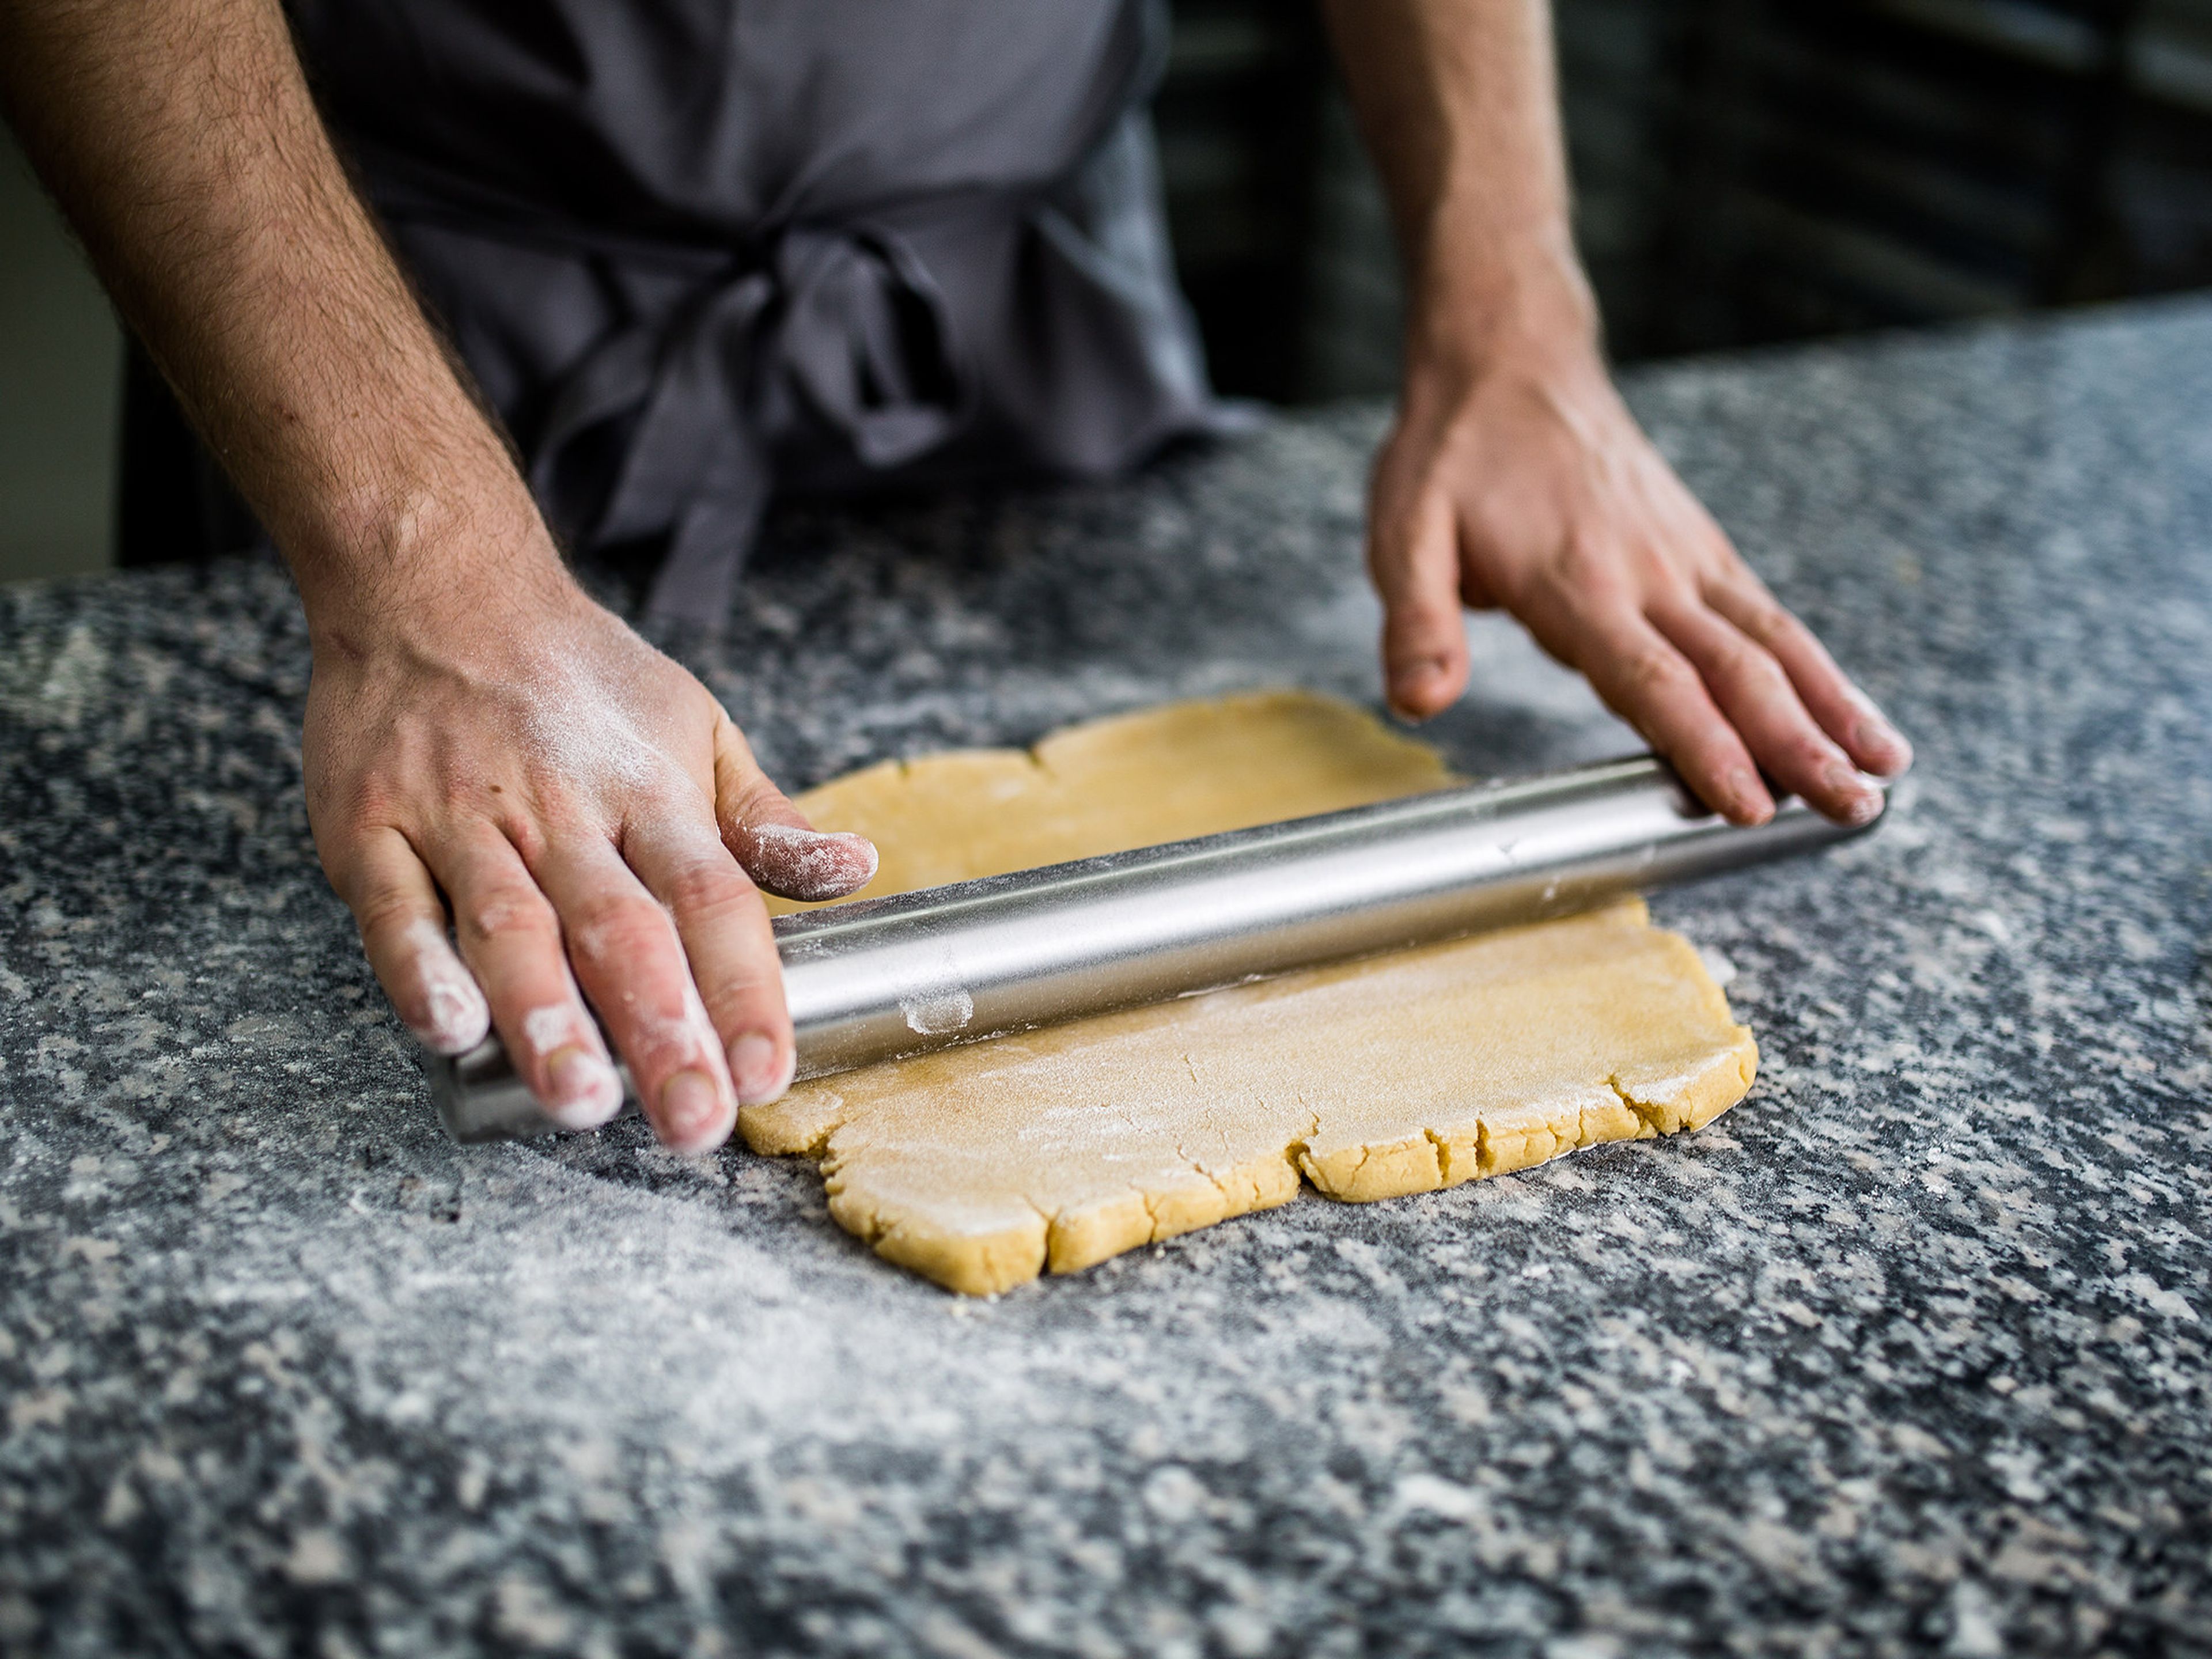 Lightly flour work surface and roll dough out until 3 – 4-mm/1/8-inch thick. Cut out rectangles that are approx. 6 cm/2 1/3 in. high and 19 cm/7.5 in. long. Set aside remaining dough.